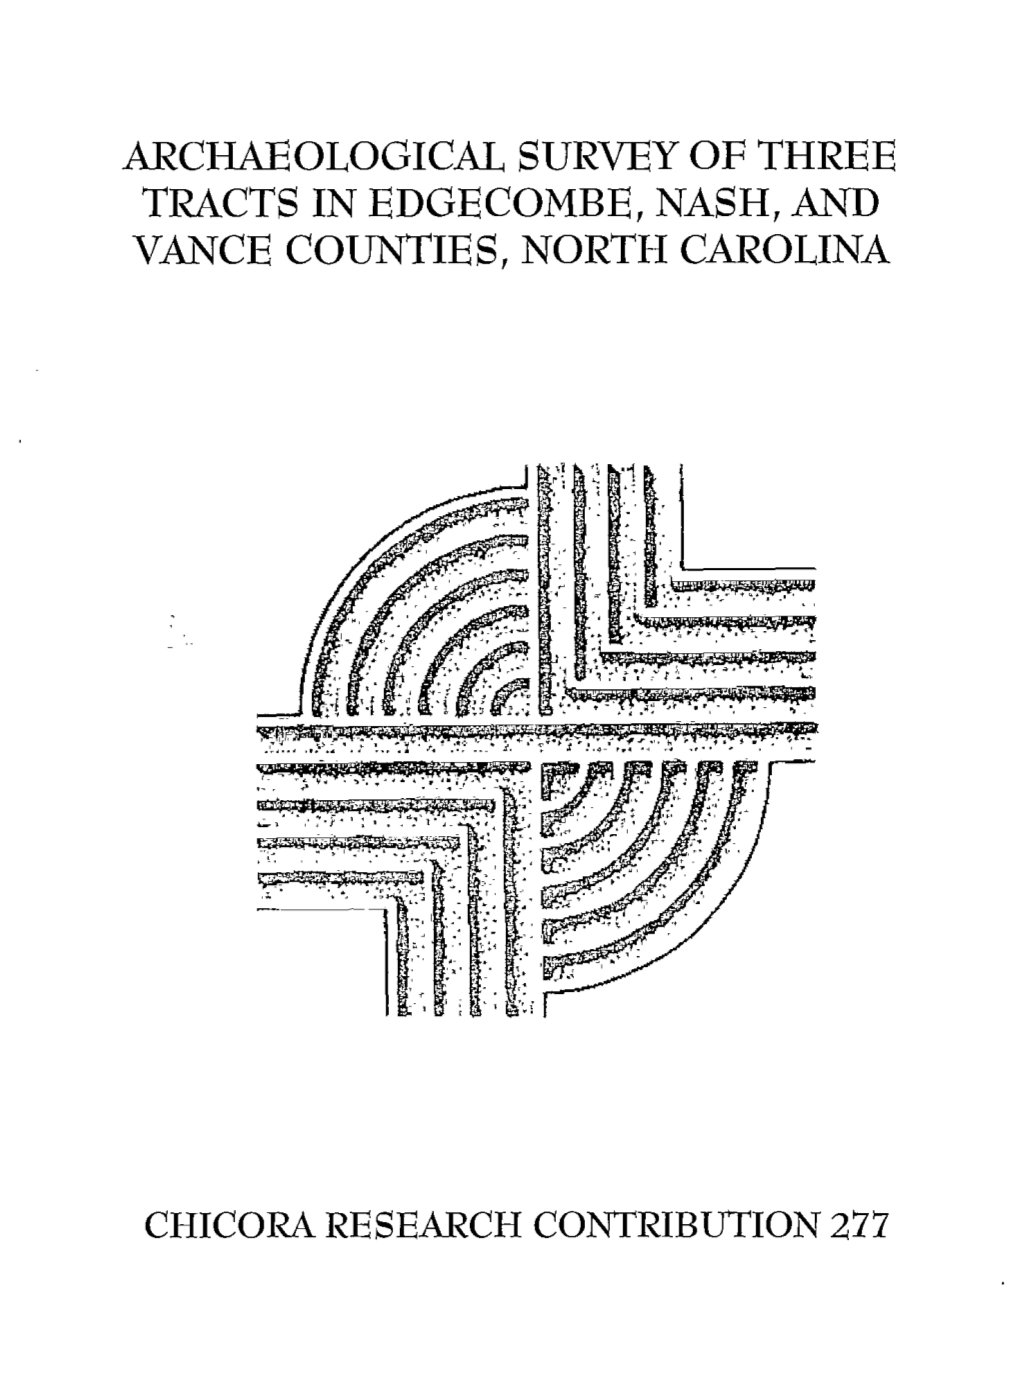 Archaeological Survey of Three Tracts in Edgecombe, Nash, and Vance Counties, North Carolina